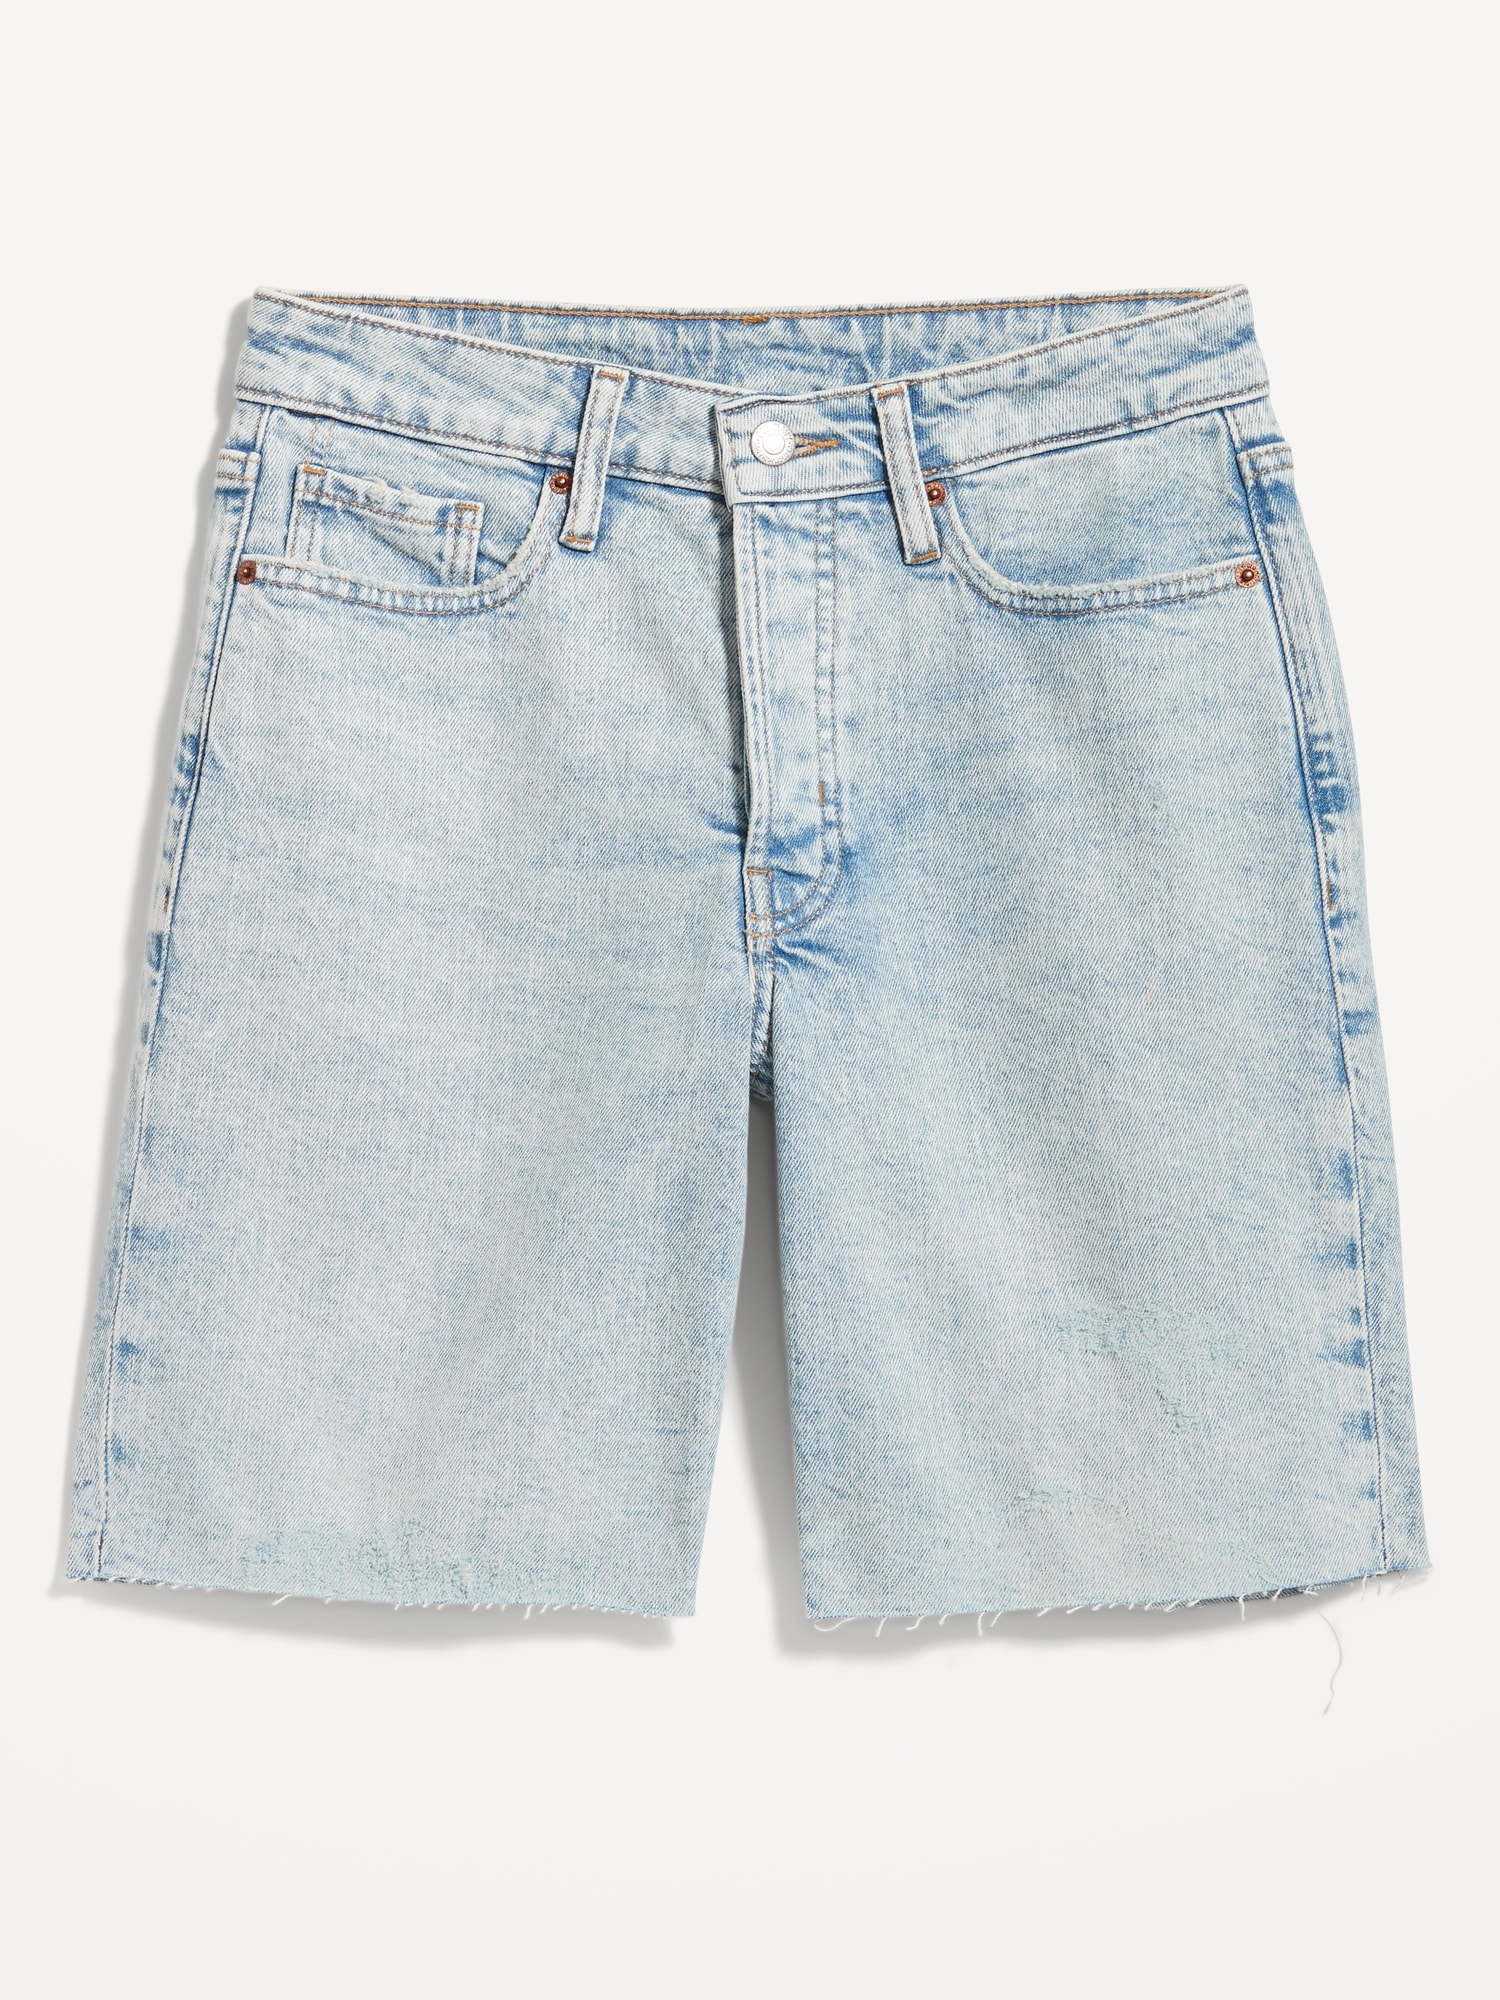 High-Waisted OG Loose Button-Fly Jean Shorts for Women -- 9